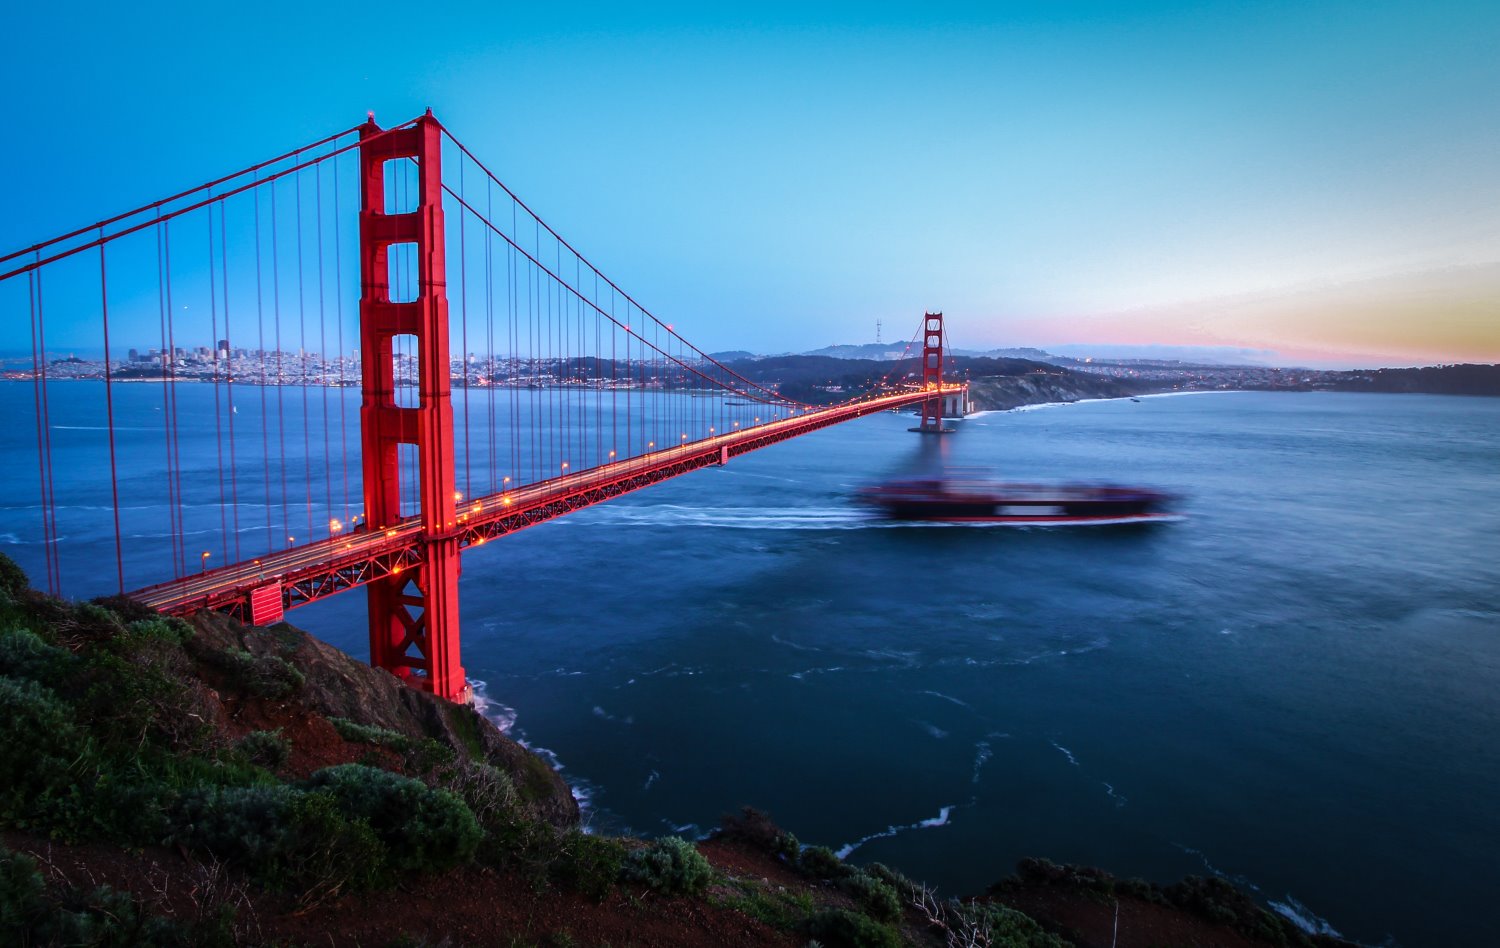 Blue Hour Photography: The Essential Guide (+ Tips)